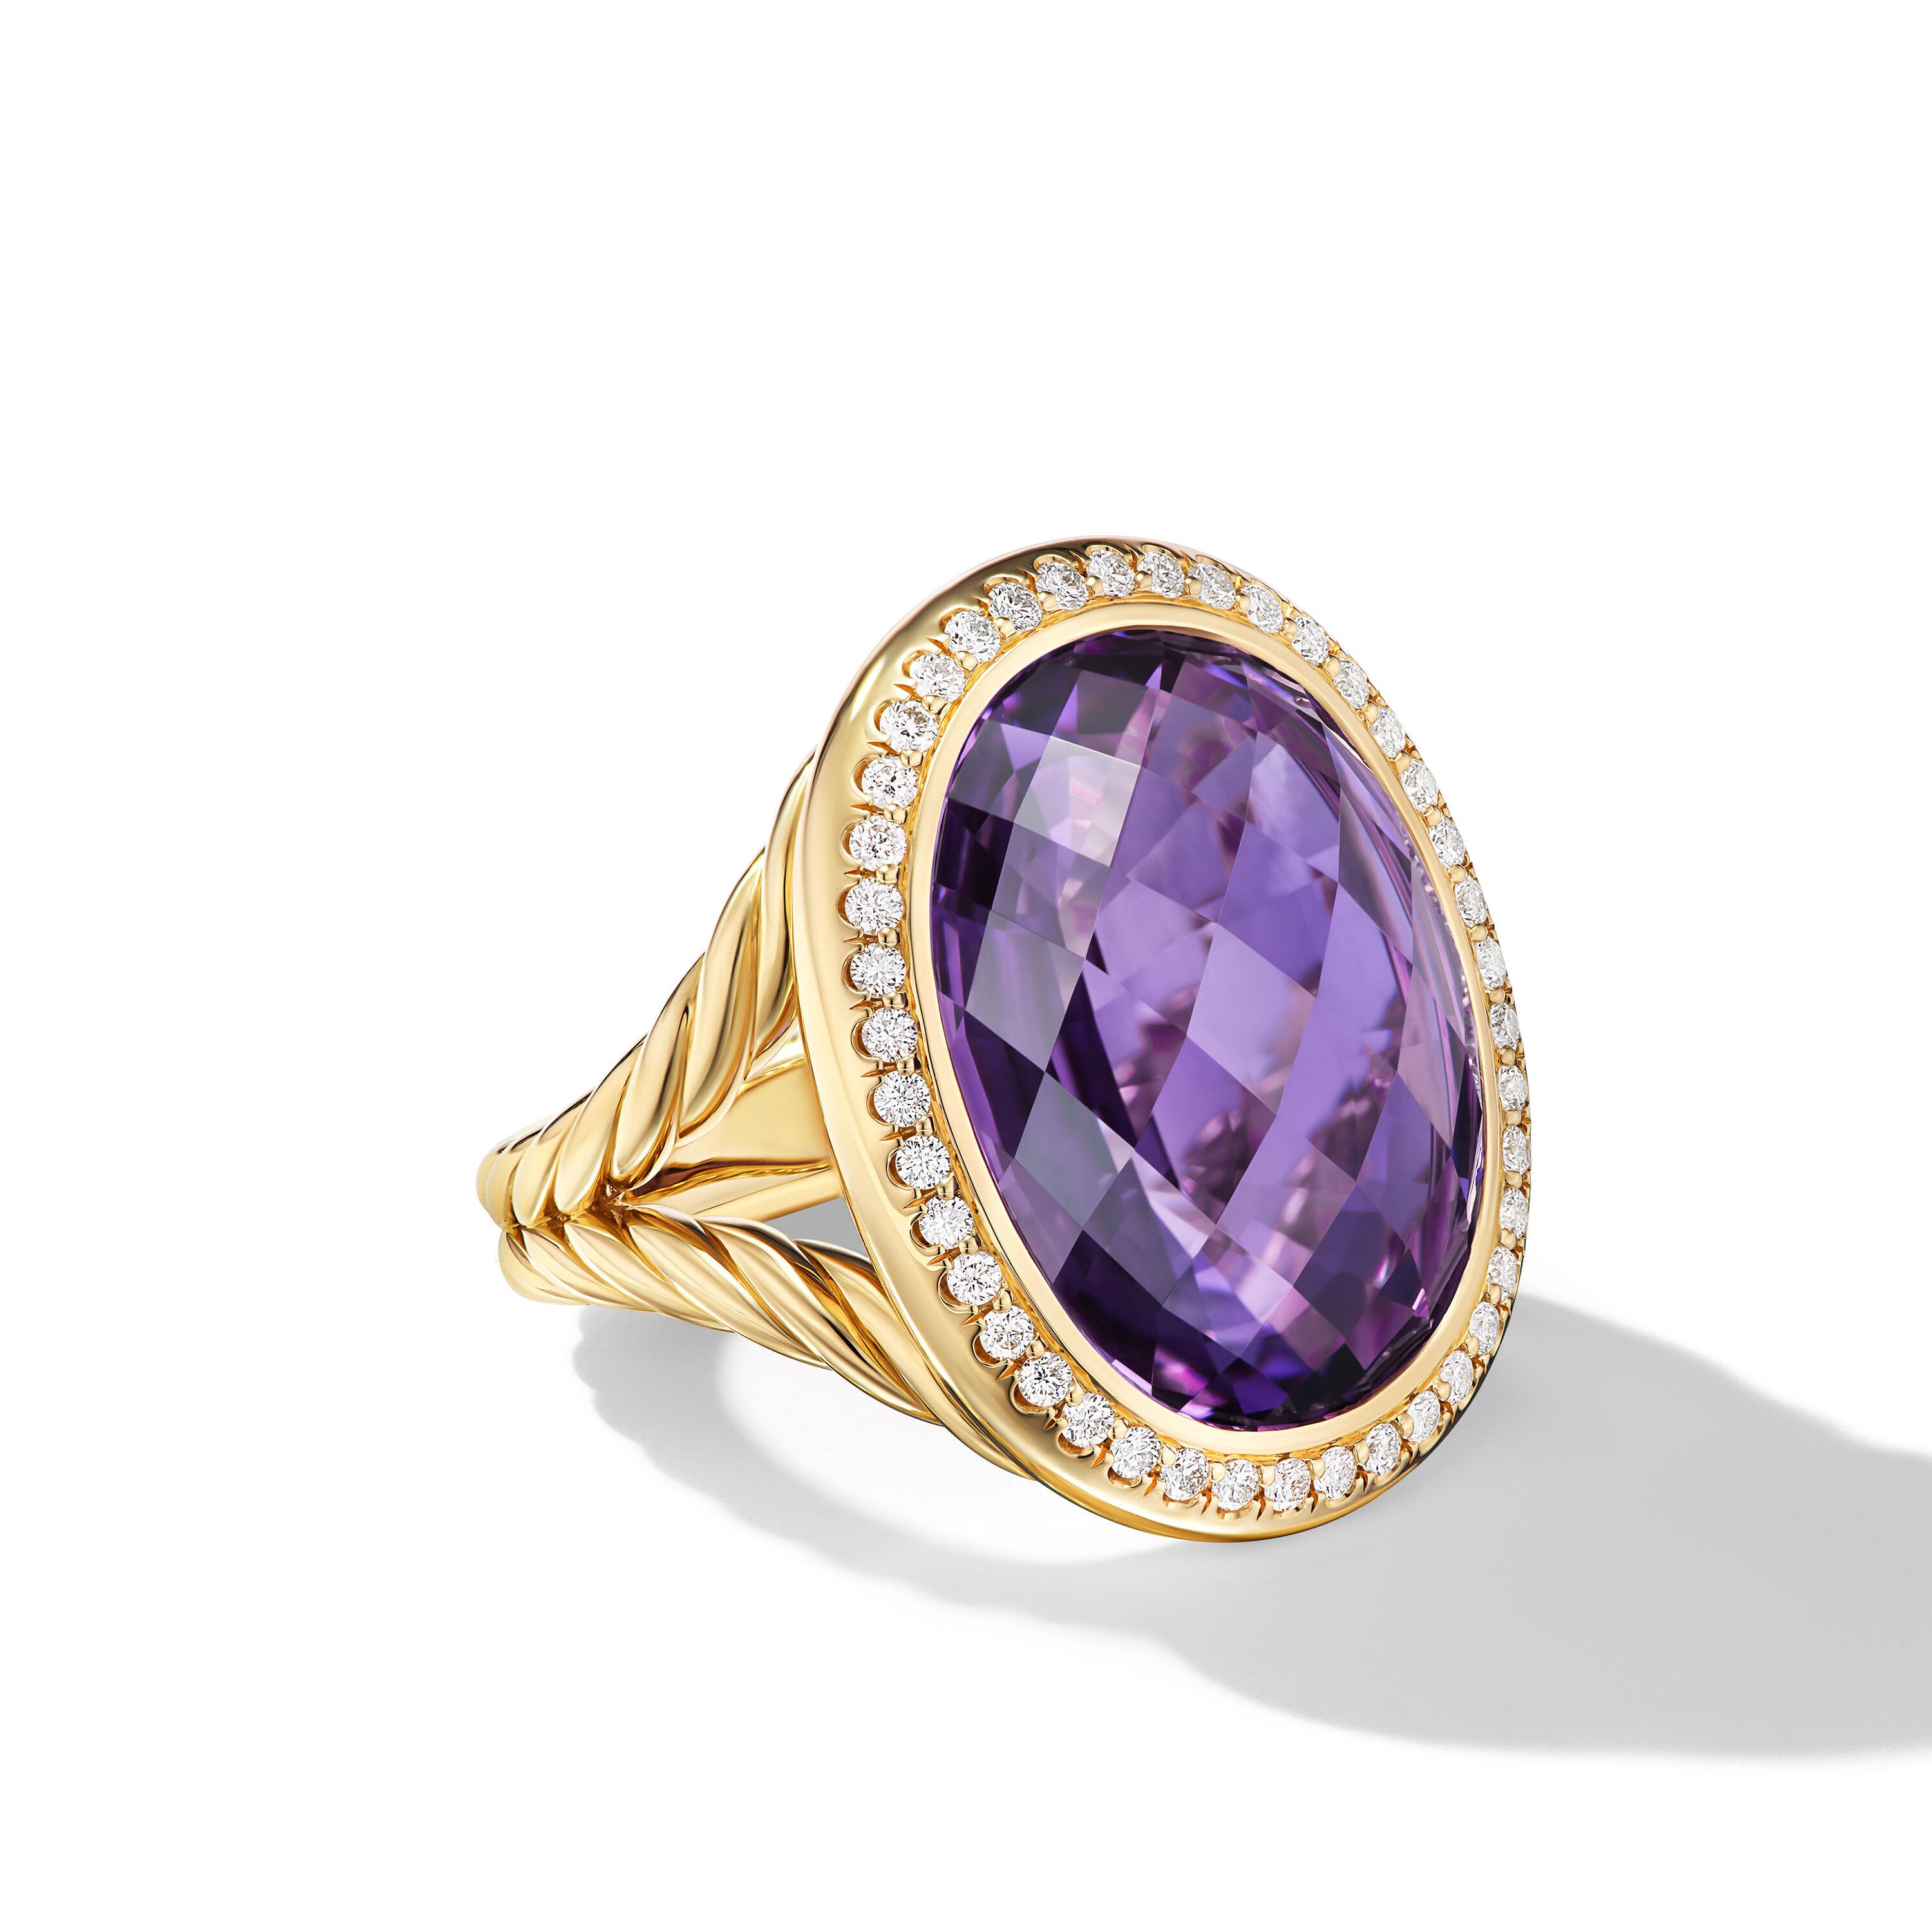 David Yurman Albion Oval Ring in 18K Yellow Gold with Amethyst and Diamonds 0